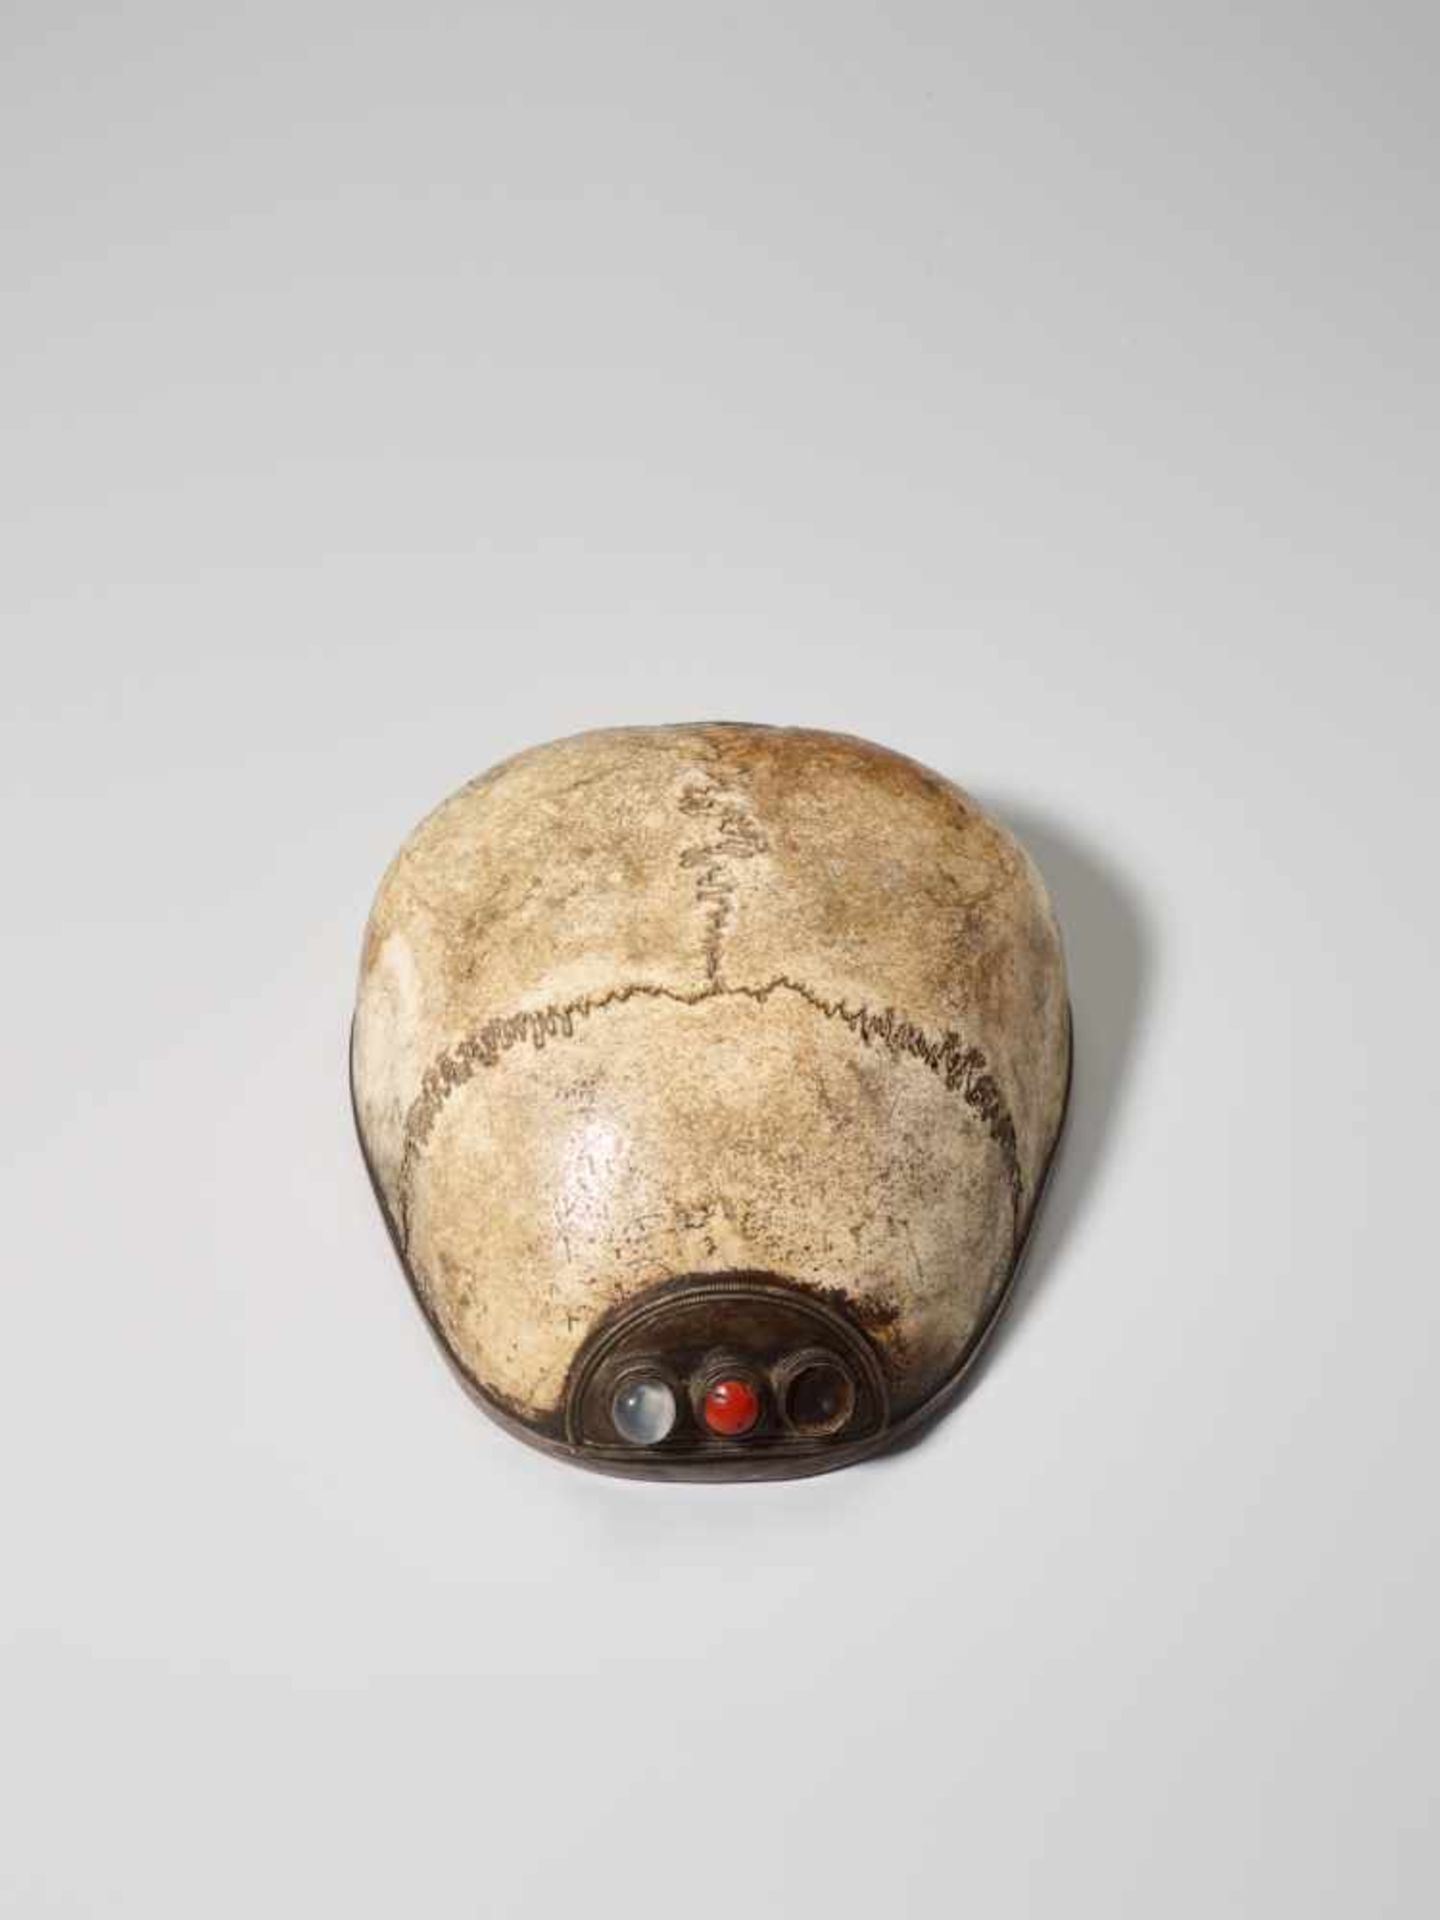 A LINED AND CABOCHON INSET RITUAL KAPALA SKULL CAP, 19th CENTURY Bone, silver-plate copper, coral - Image 2 of 7